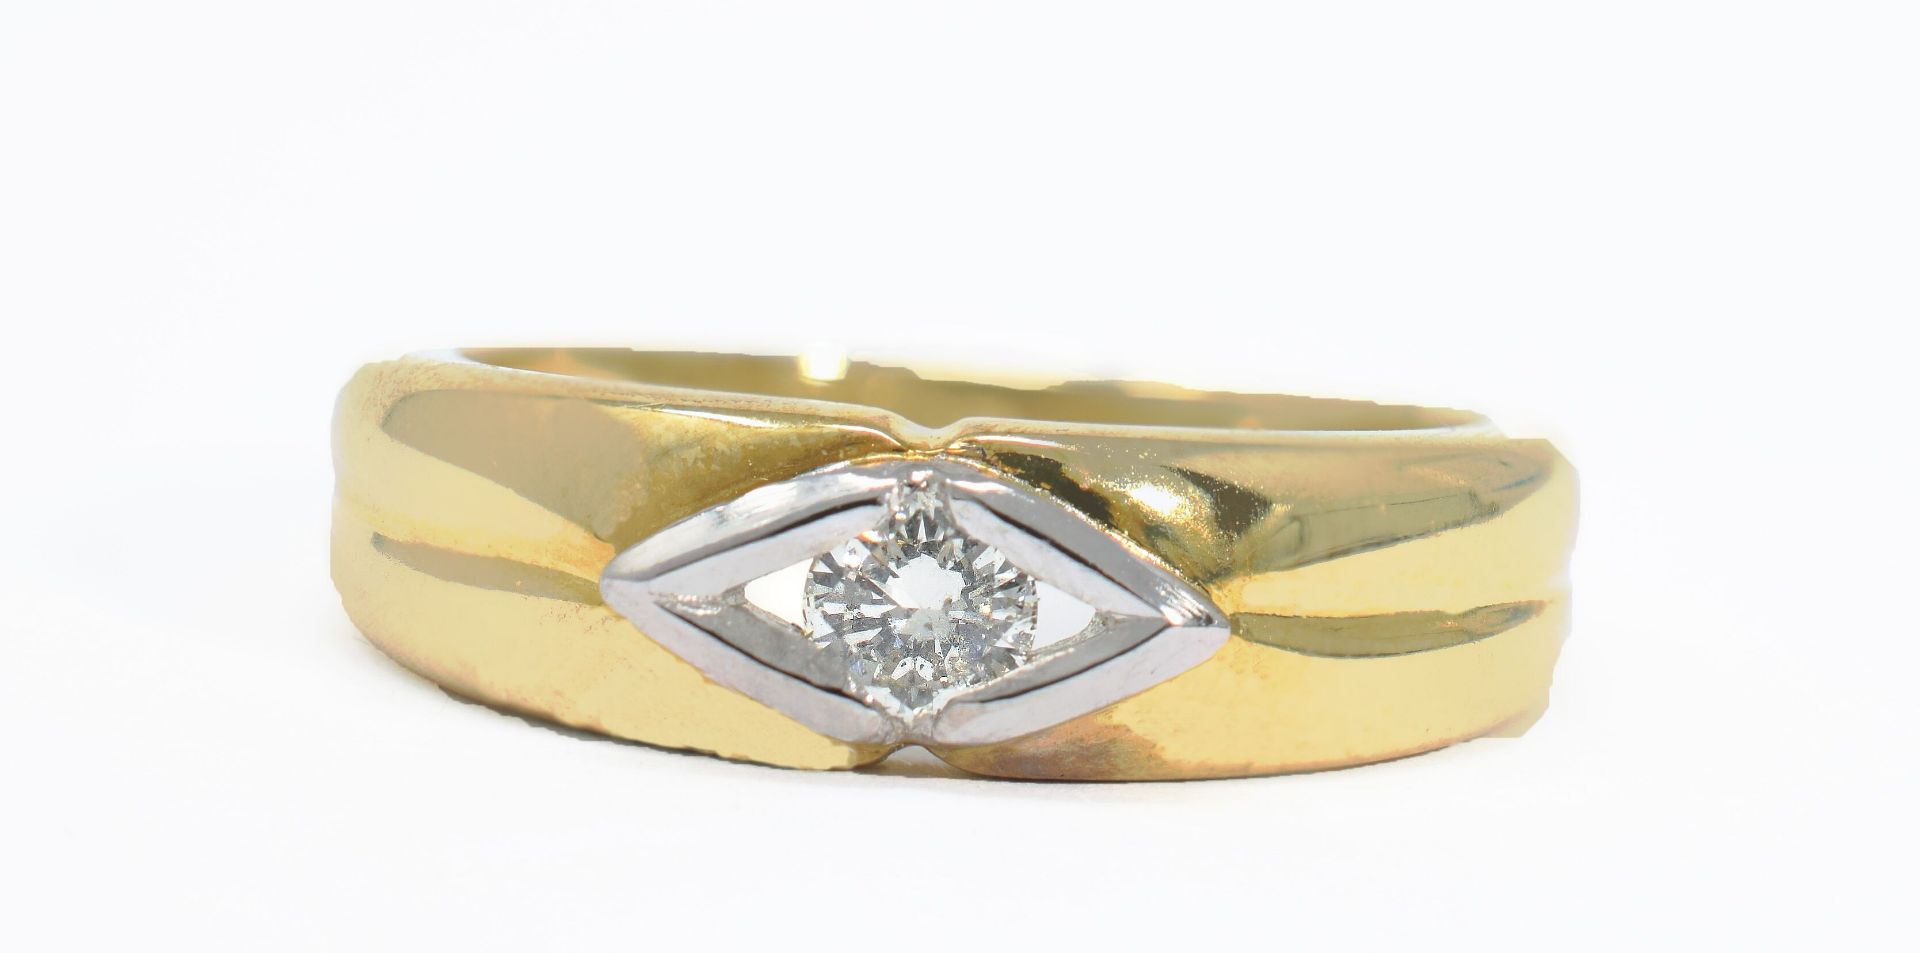 Diamond Ring, 9ct Yellow Gold, RRP £1,599 Weight 3.73g, Diamond Weight 0.22ct, Colour H, Clarity SI1